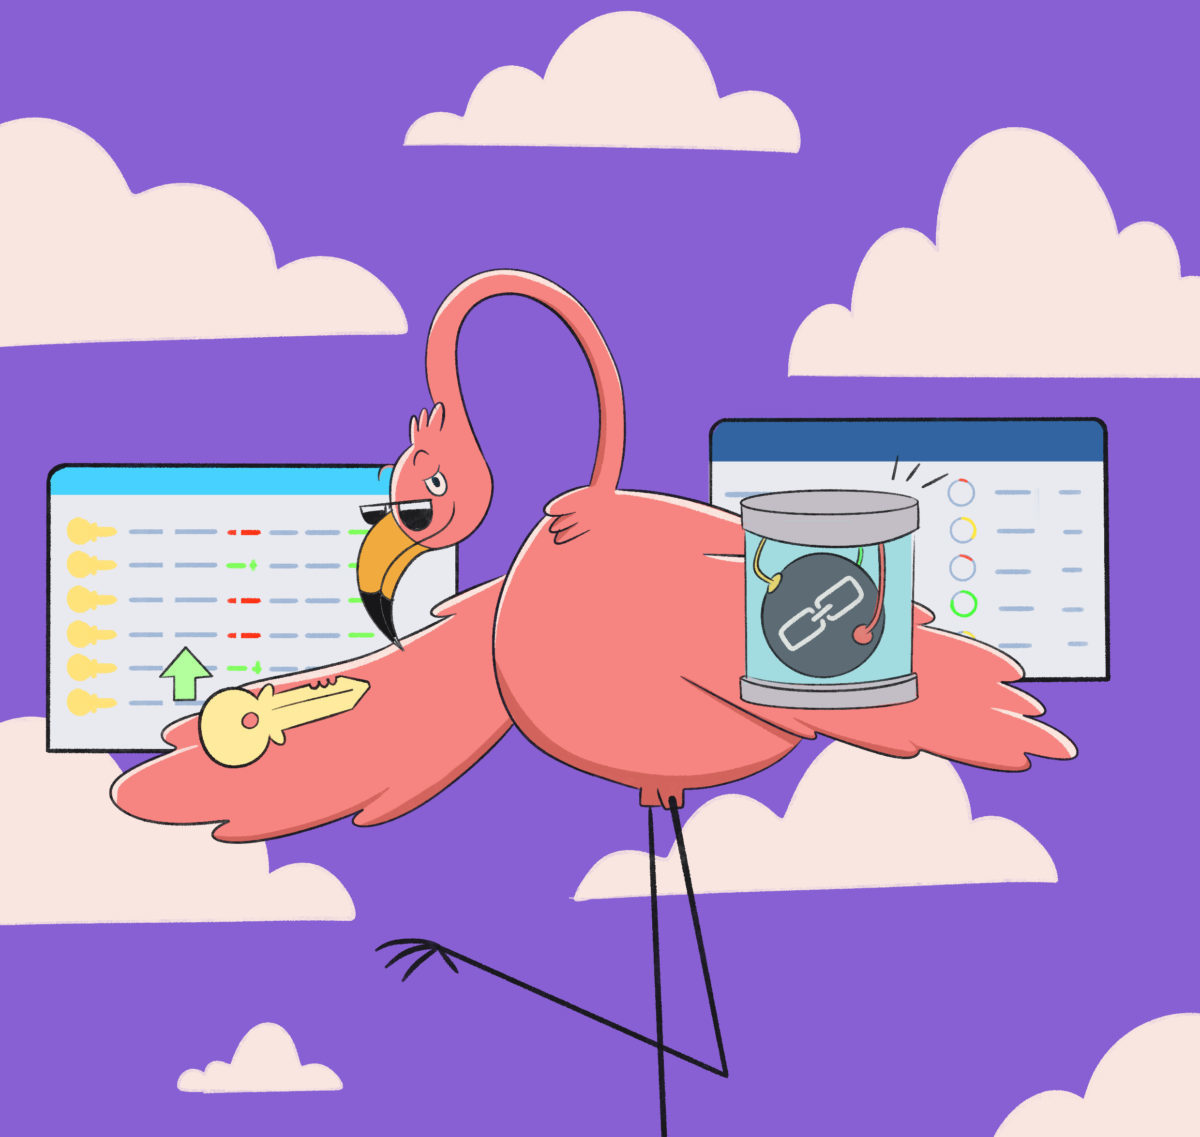 A cartoon illustration of a flamingo typing on a computer keyboard with a can of sardines besides it, set against a cloud-filled sky background.